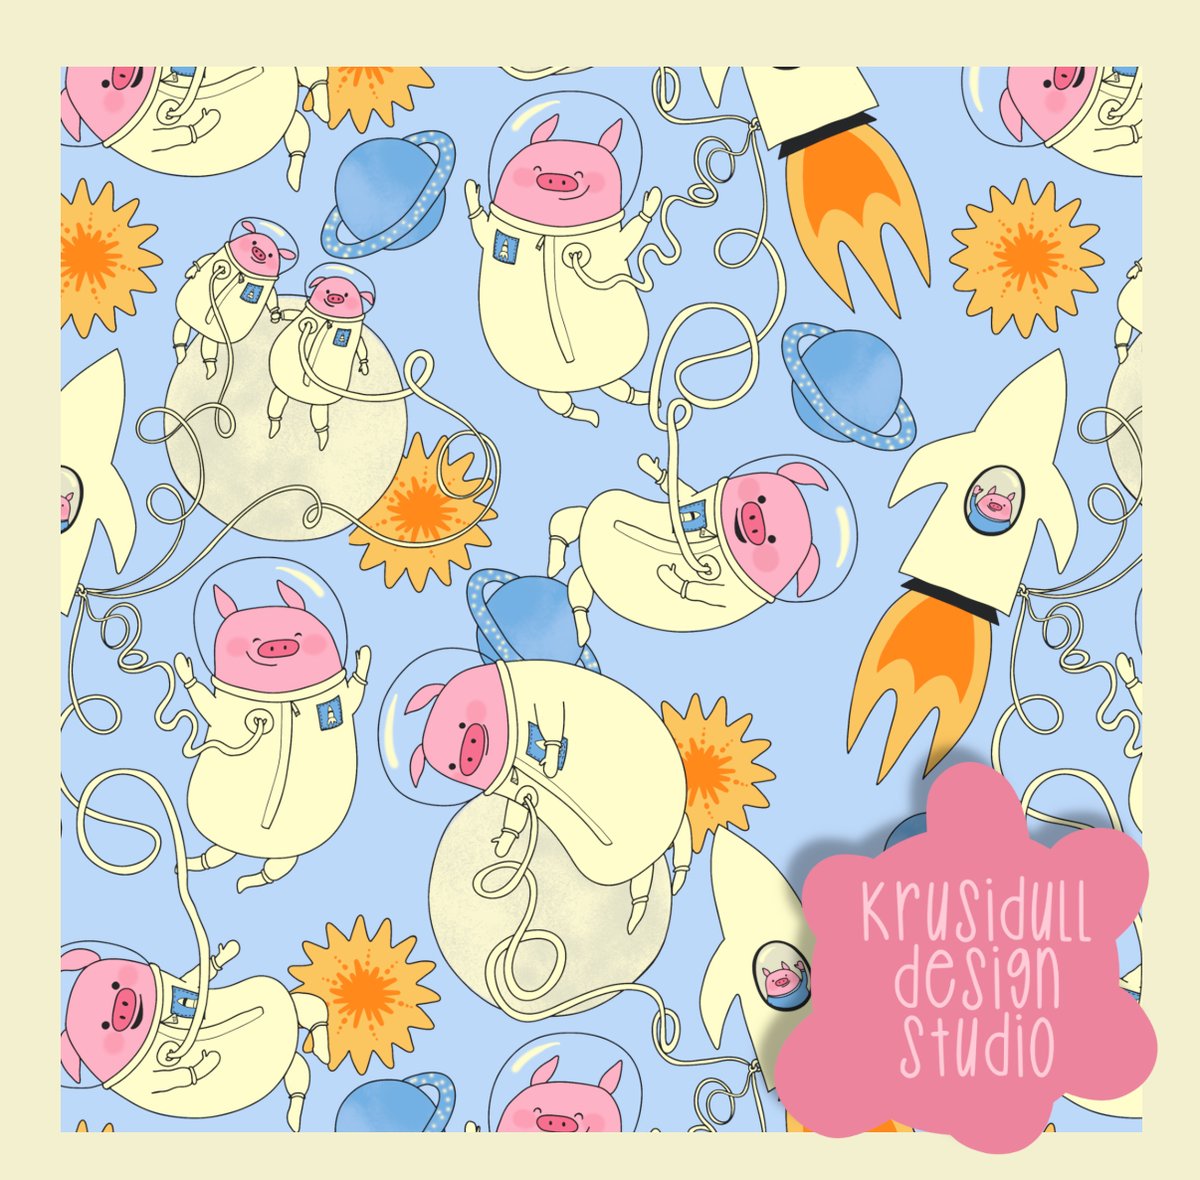 A new 'spoonflower challenge is starting on thursday. This is my entry: 'Space pigs' Hope you like it! ❣️ spoonflower.com/design-challen… #sewing #fabric #Hobbies #patterndesign #illustrationartist